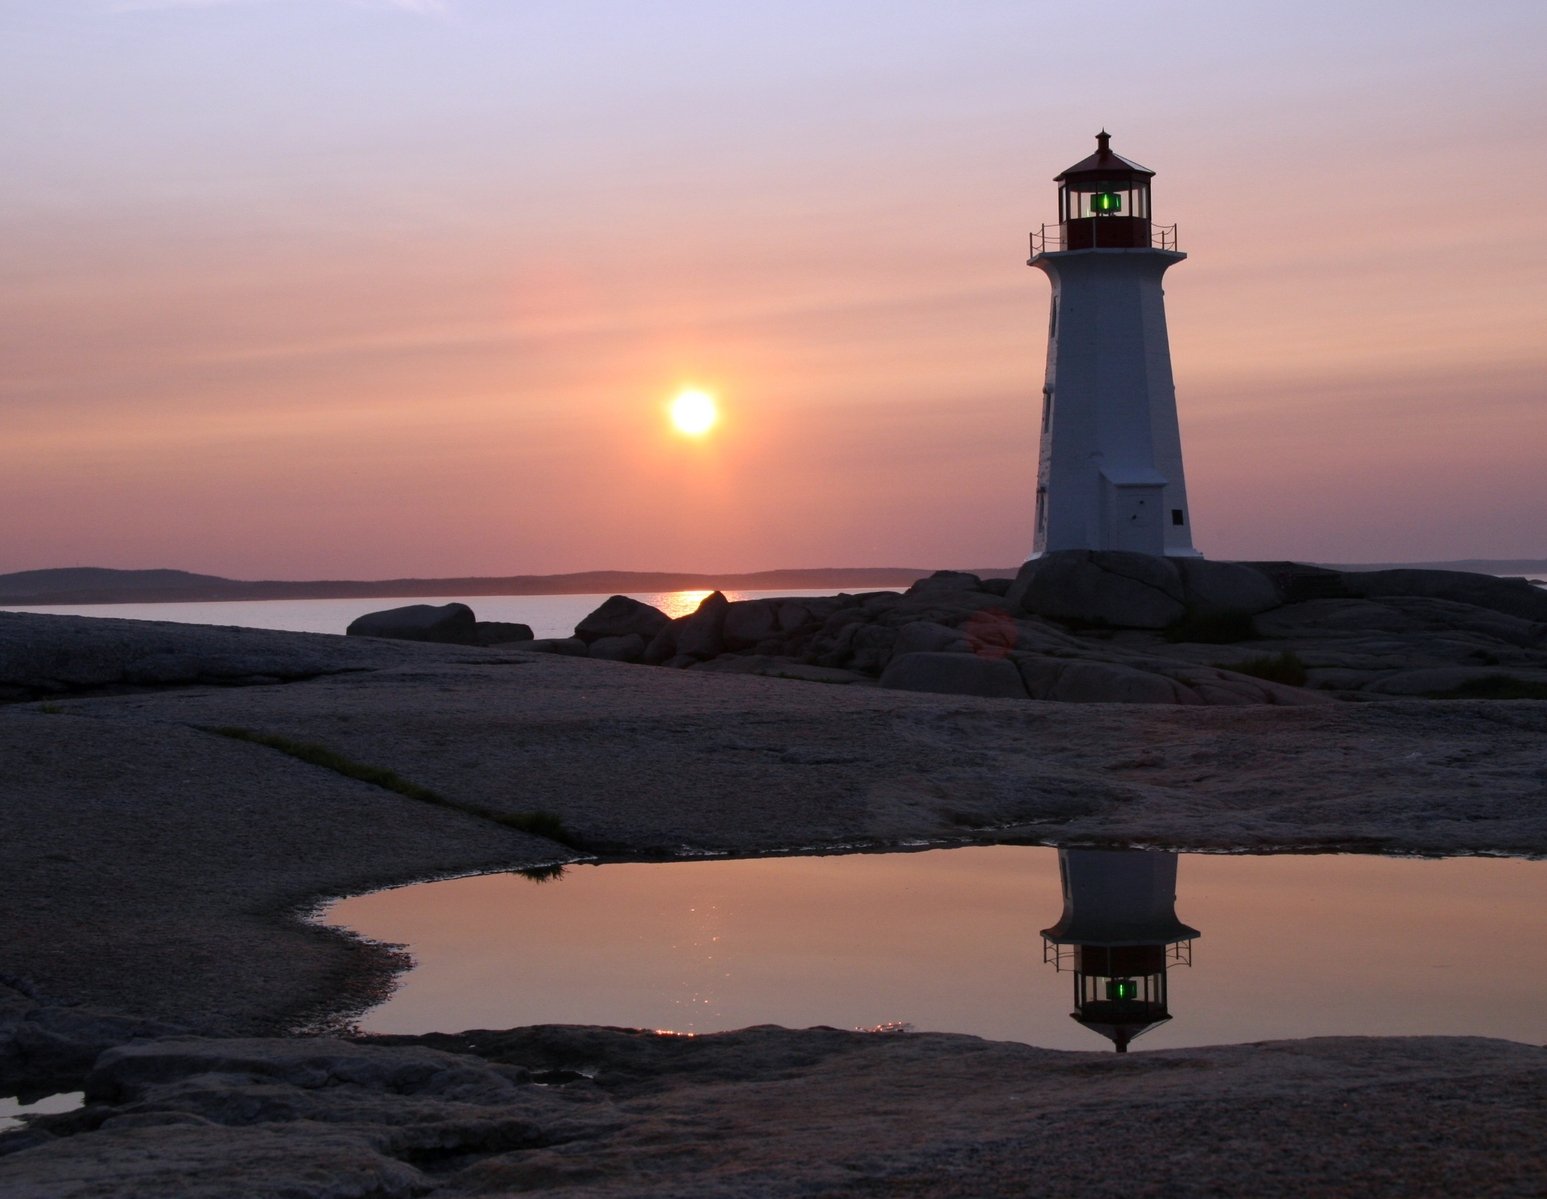 the sunset is rising over a lighthouse and rocky shoreline